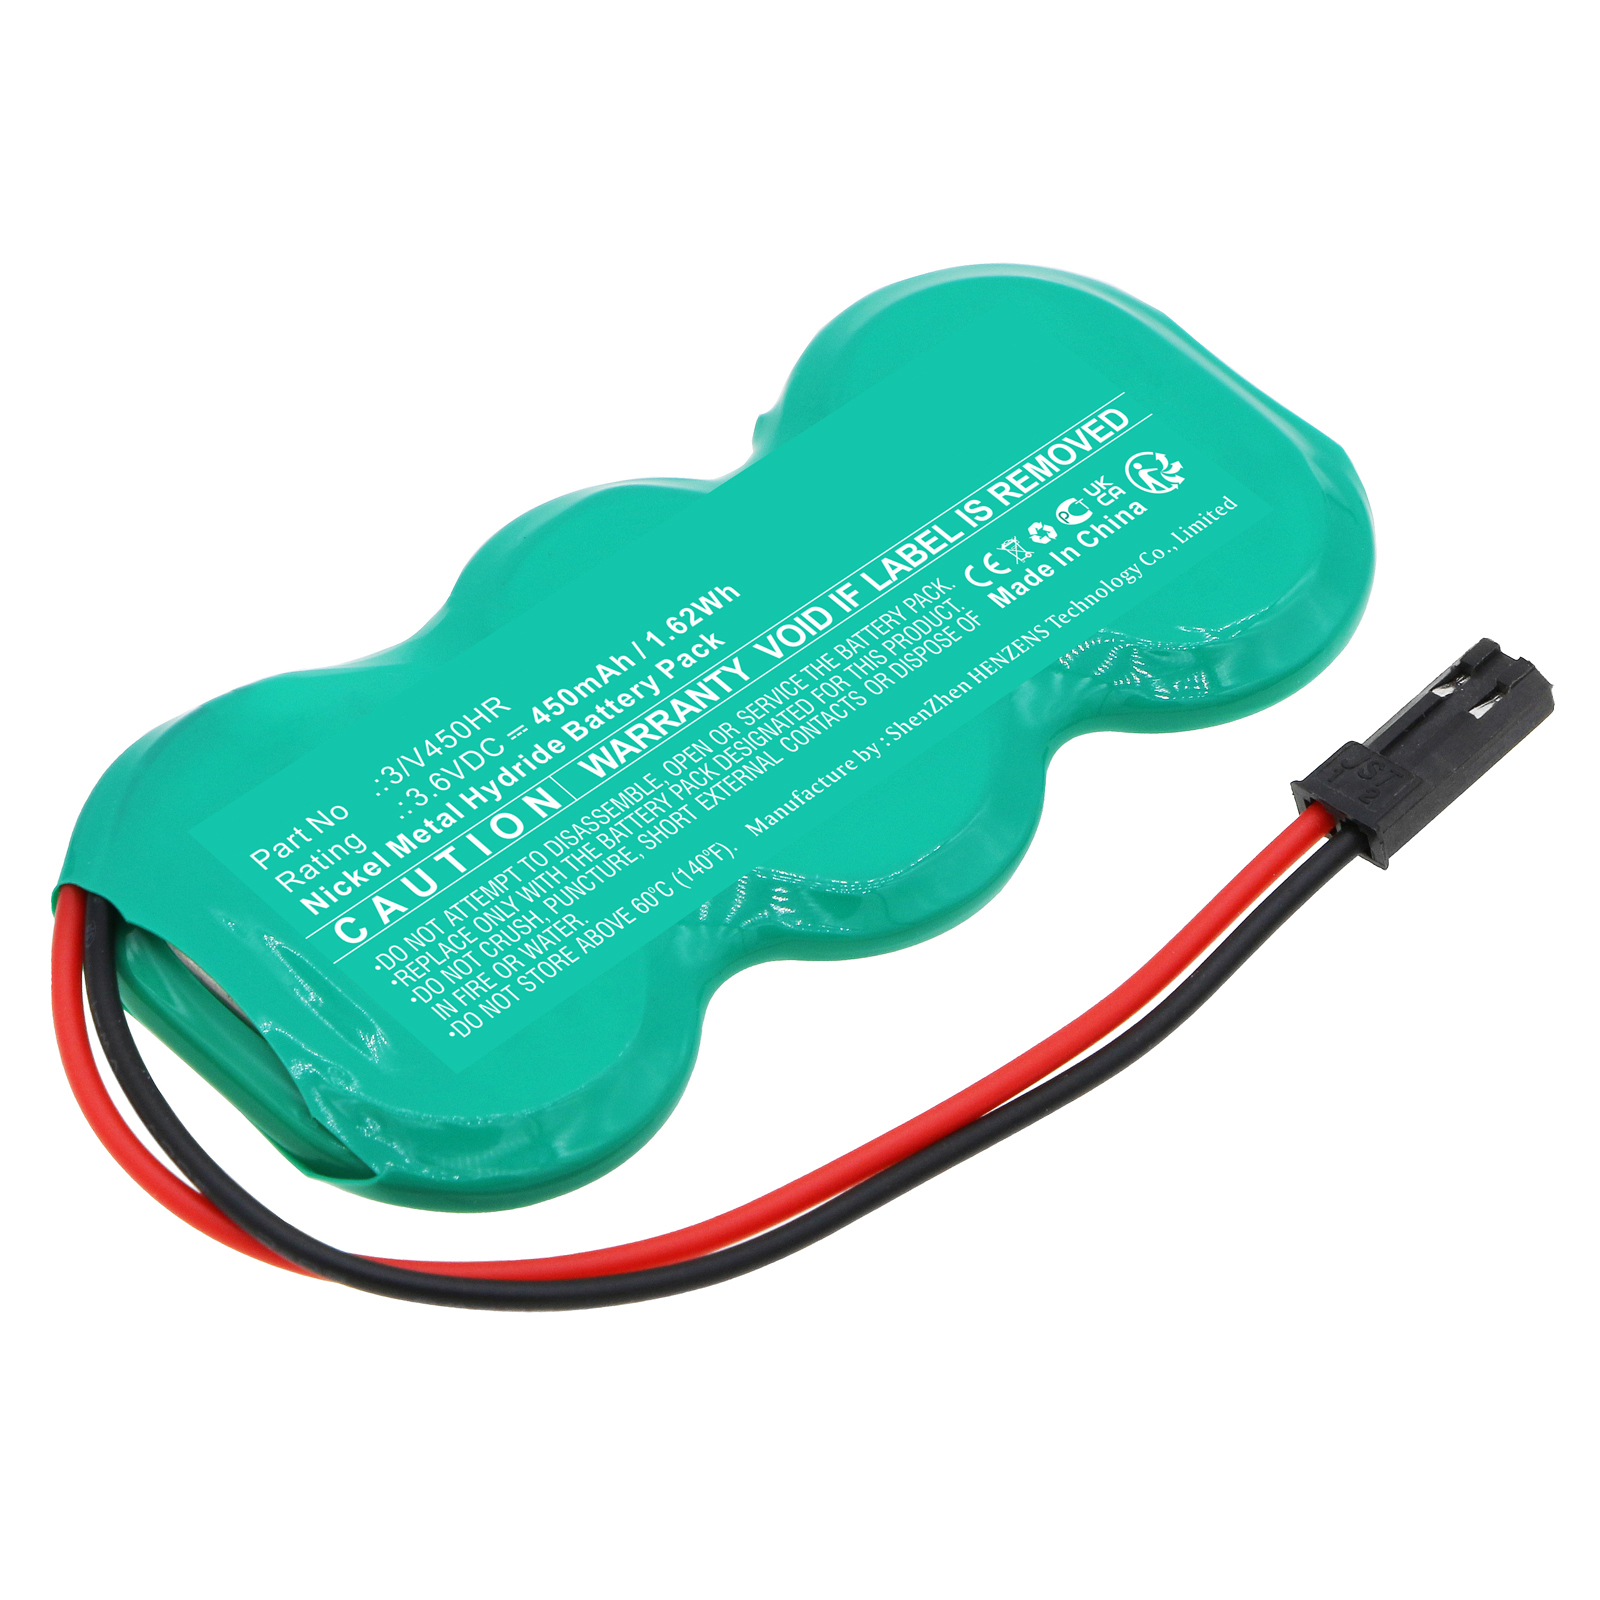 Synergy Digital CMOS/BIOS Battery, Compatible with Brother 3/V450HR CMOS/BIOS Battery (Ni-MH, 3.6V, 450mAh)